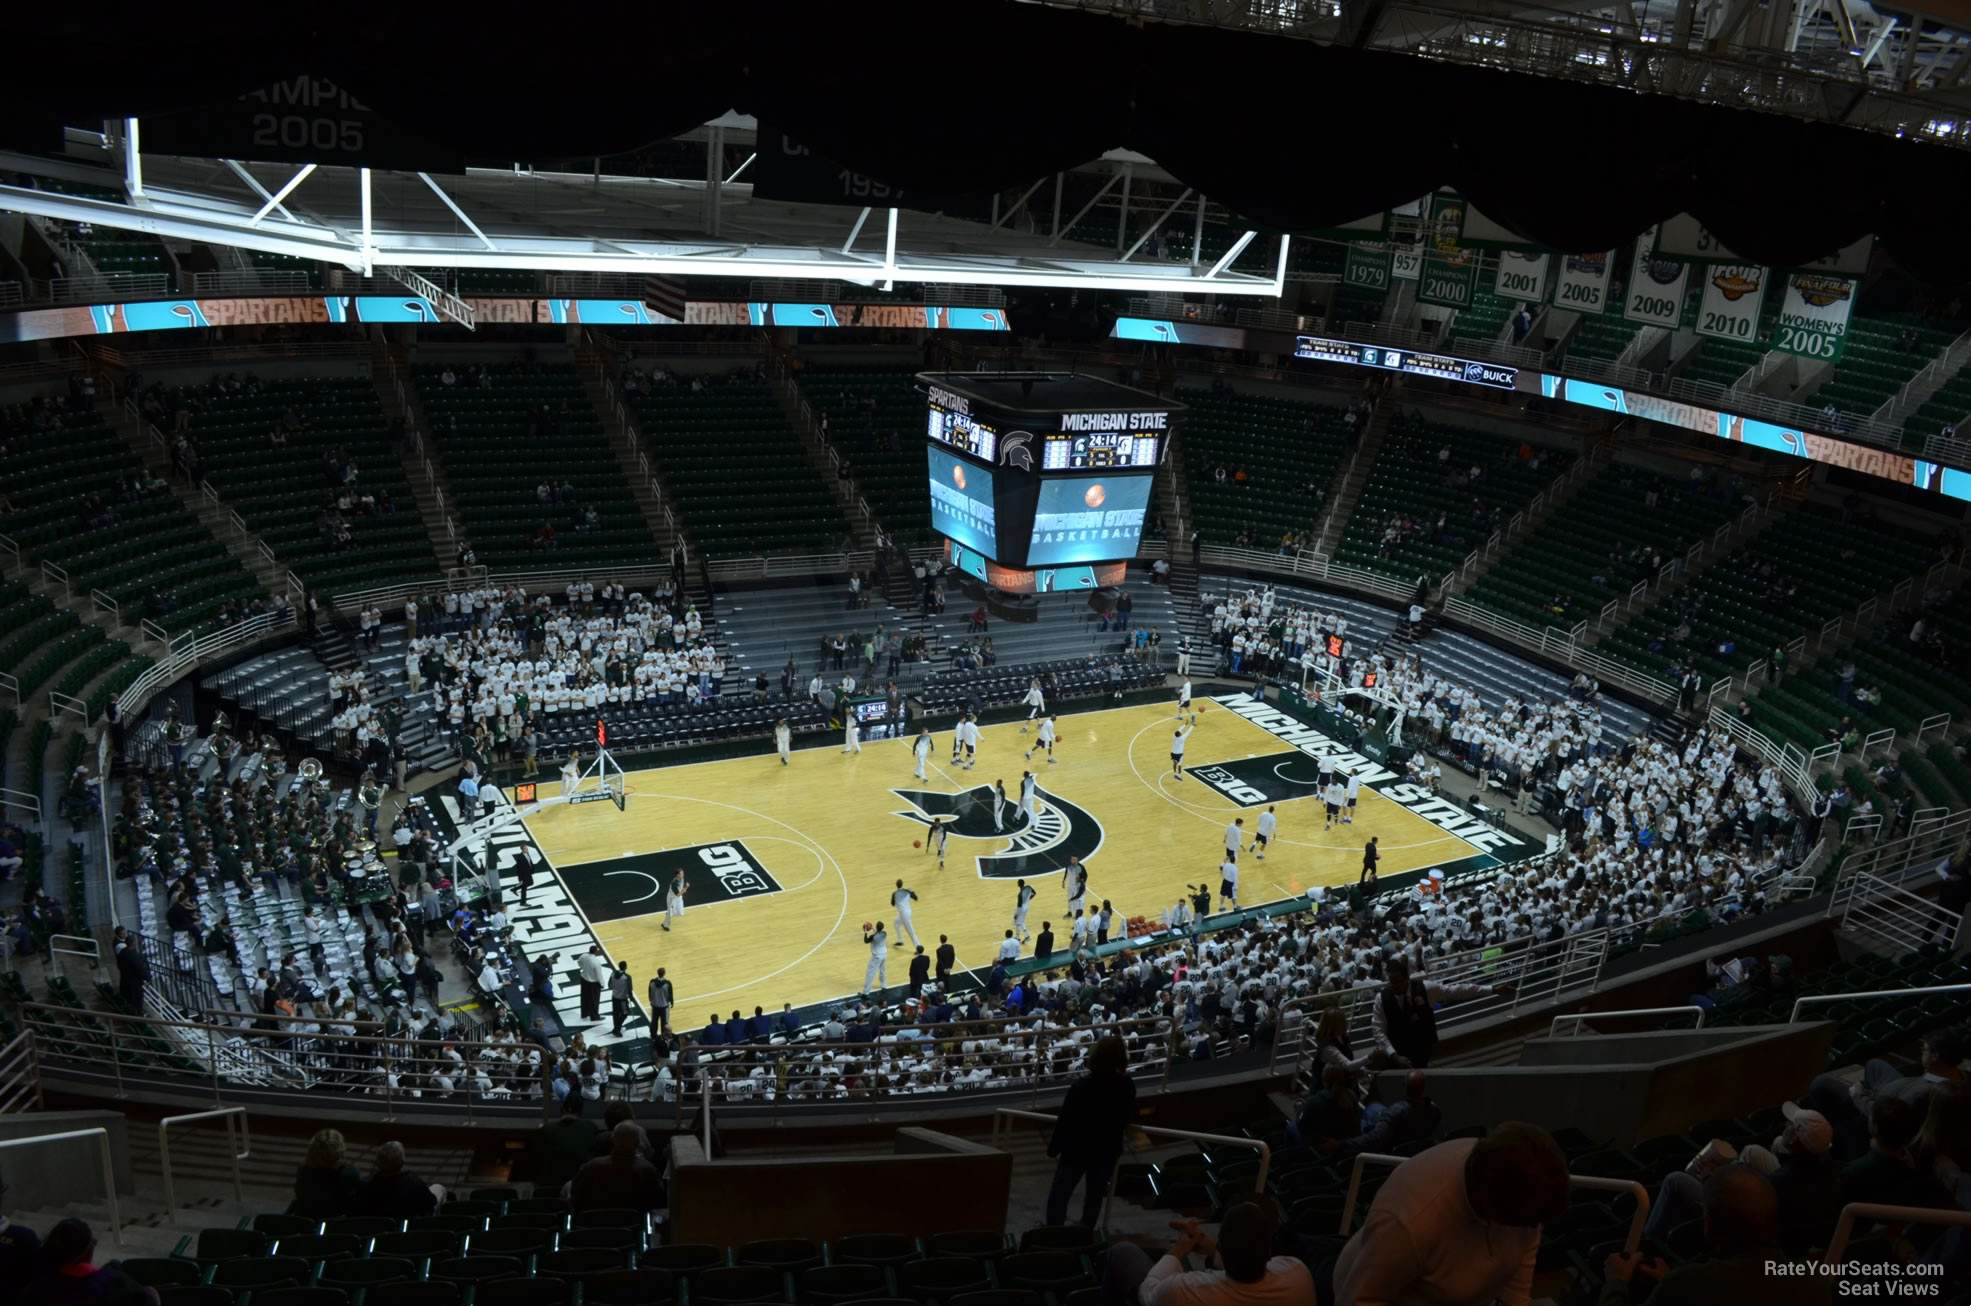 section 212, row 15 seat view  - breslin center